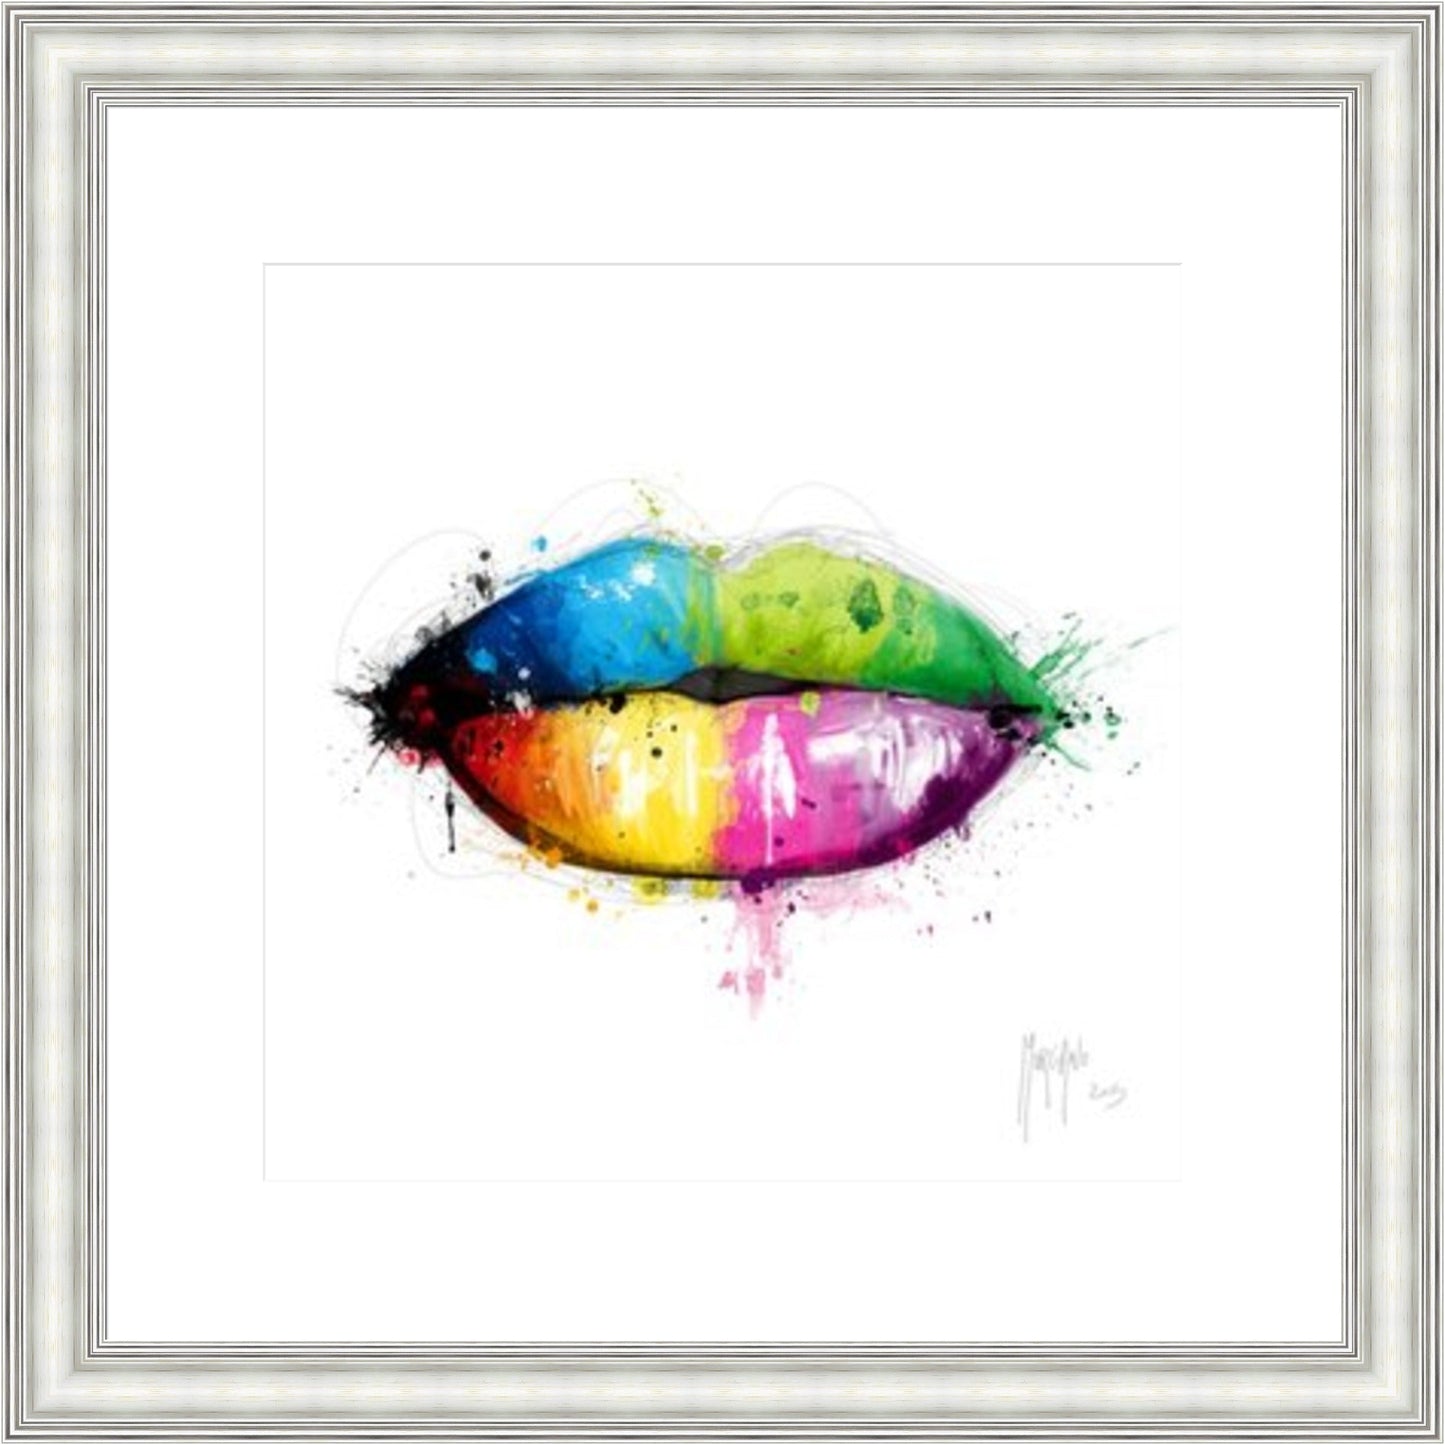 Candy Mouth (Lips) by Patrice Murciano